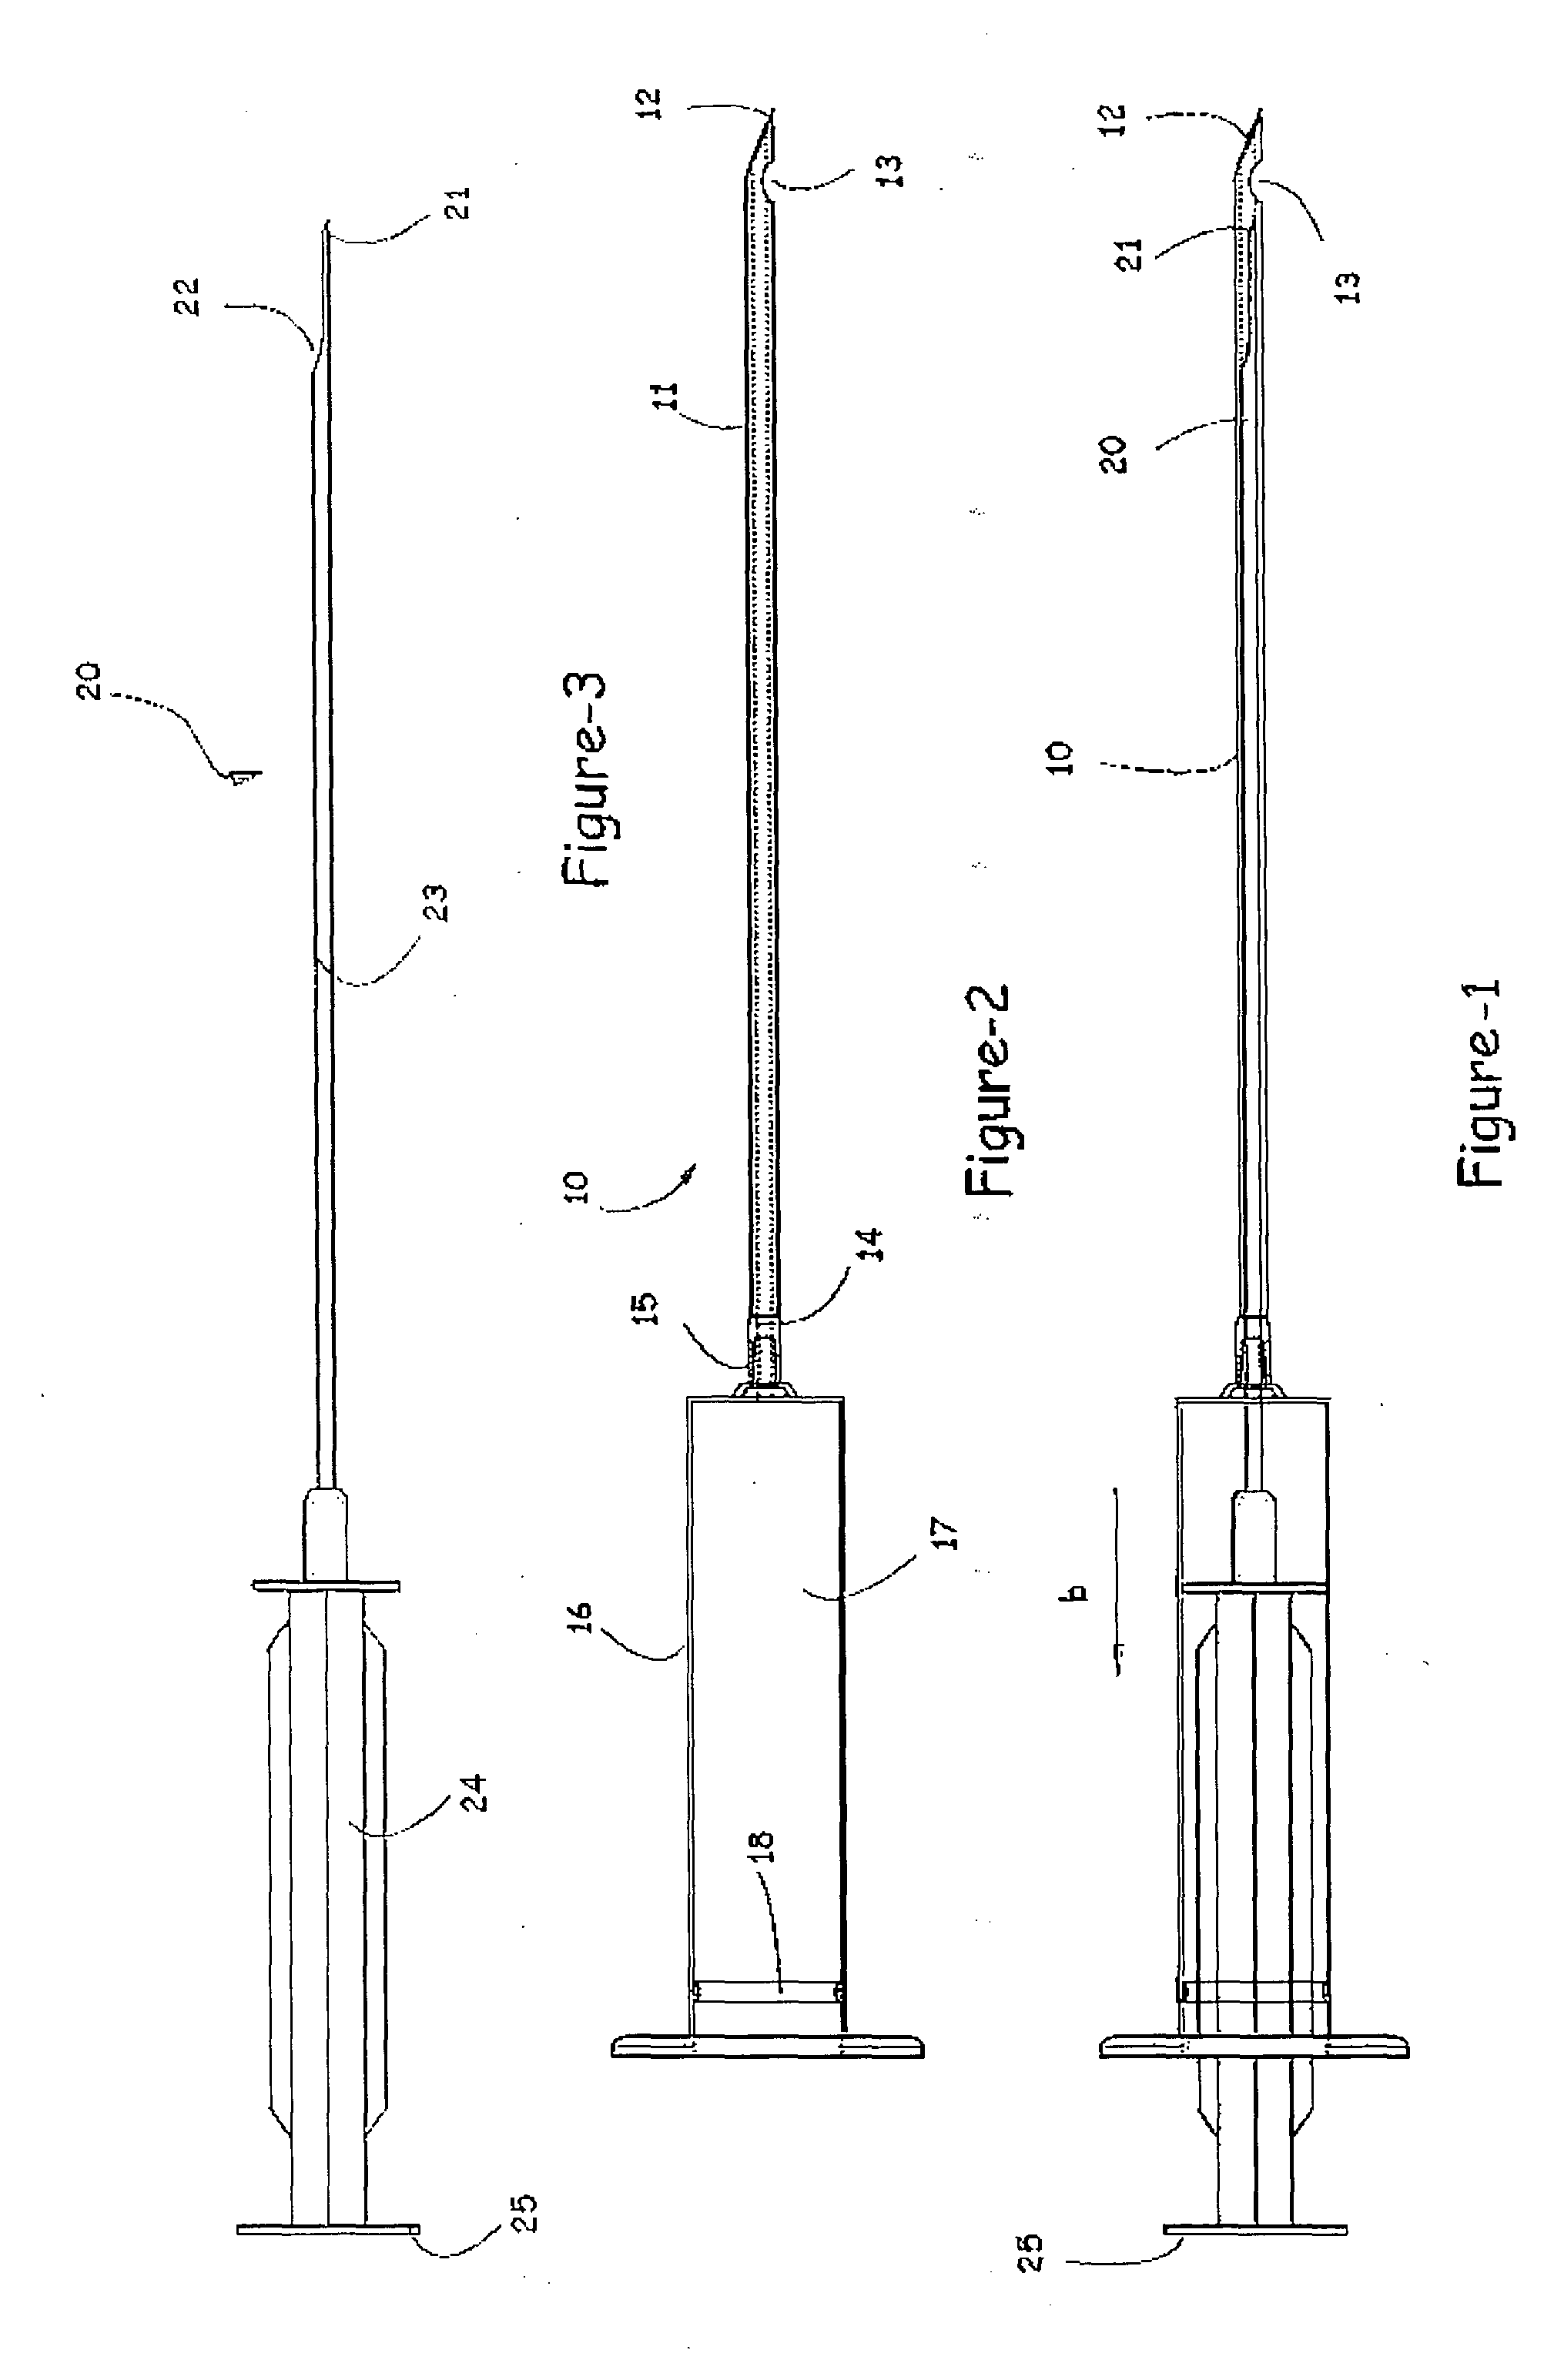 Practical and Safe Needle Biopsy Device